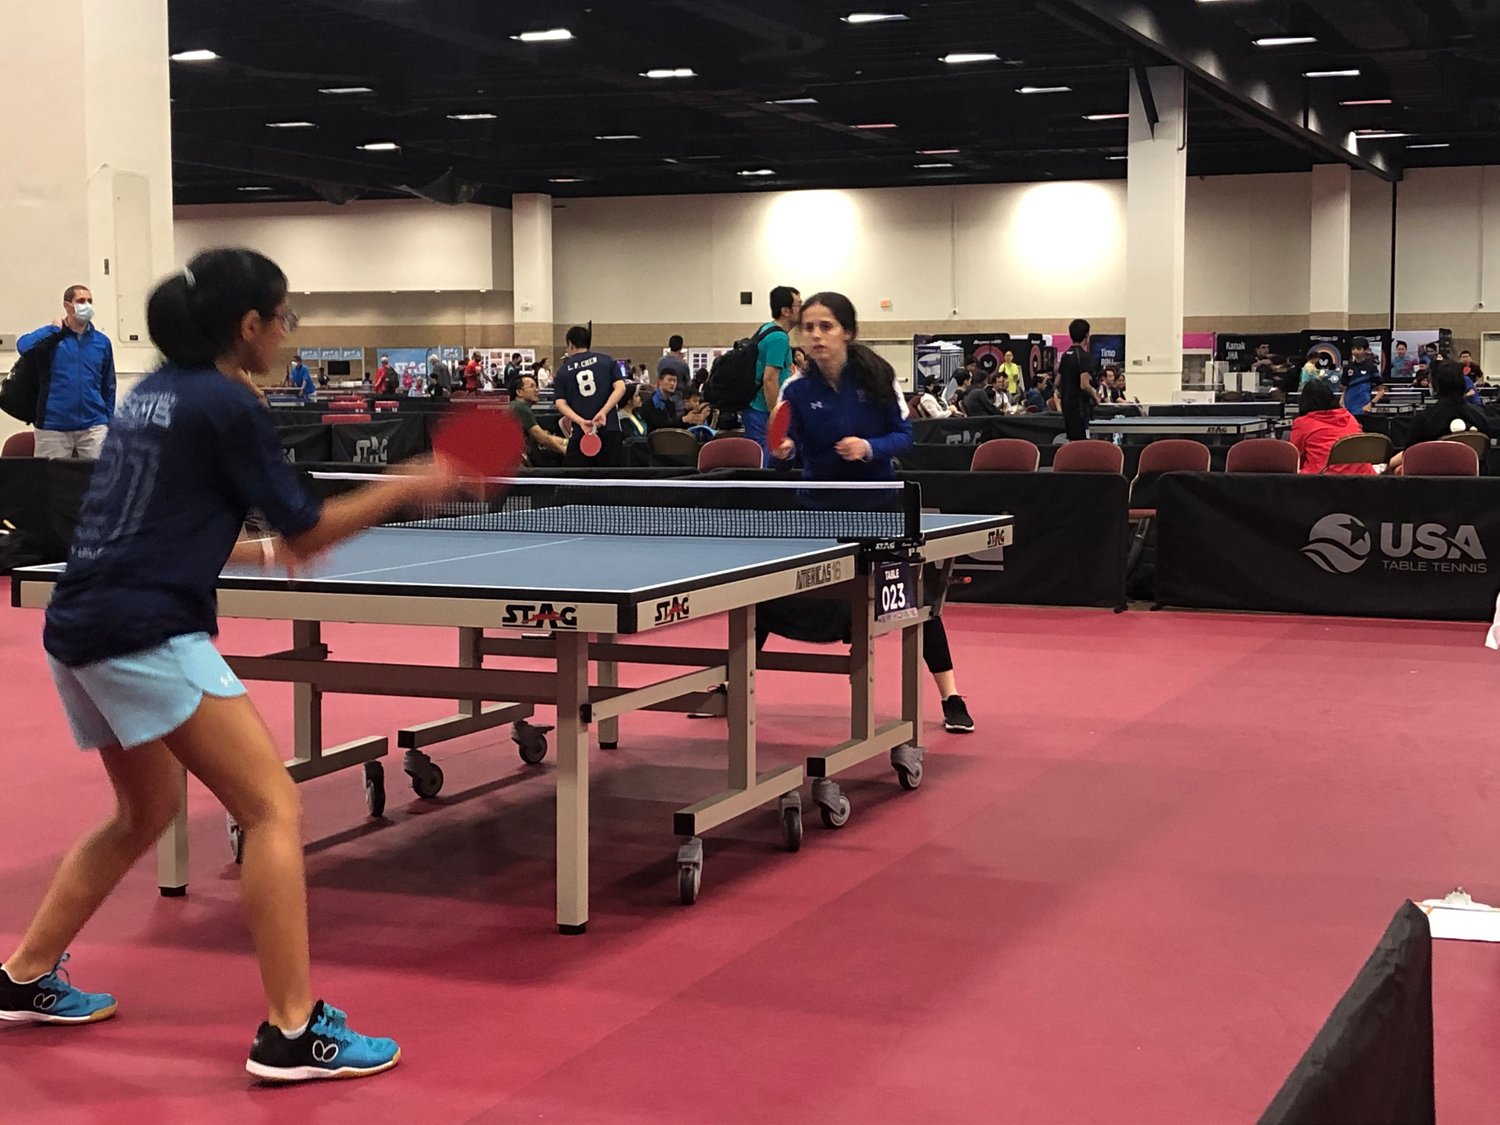 Courtesy Glenn Ackerman
Orthodox Jewish table tennis player Estee Ackerman’s one-time coach allegedly berated her for her modest style of clothing.